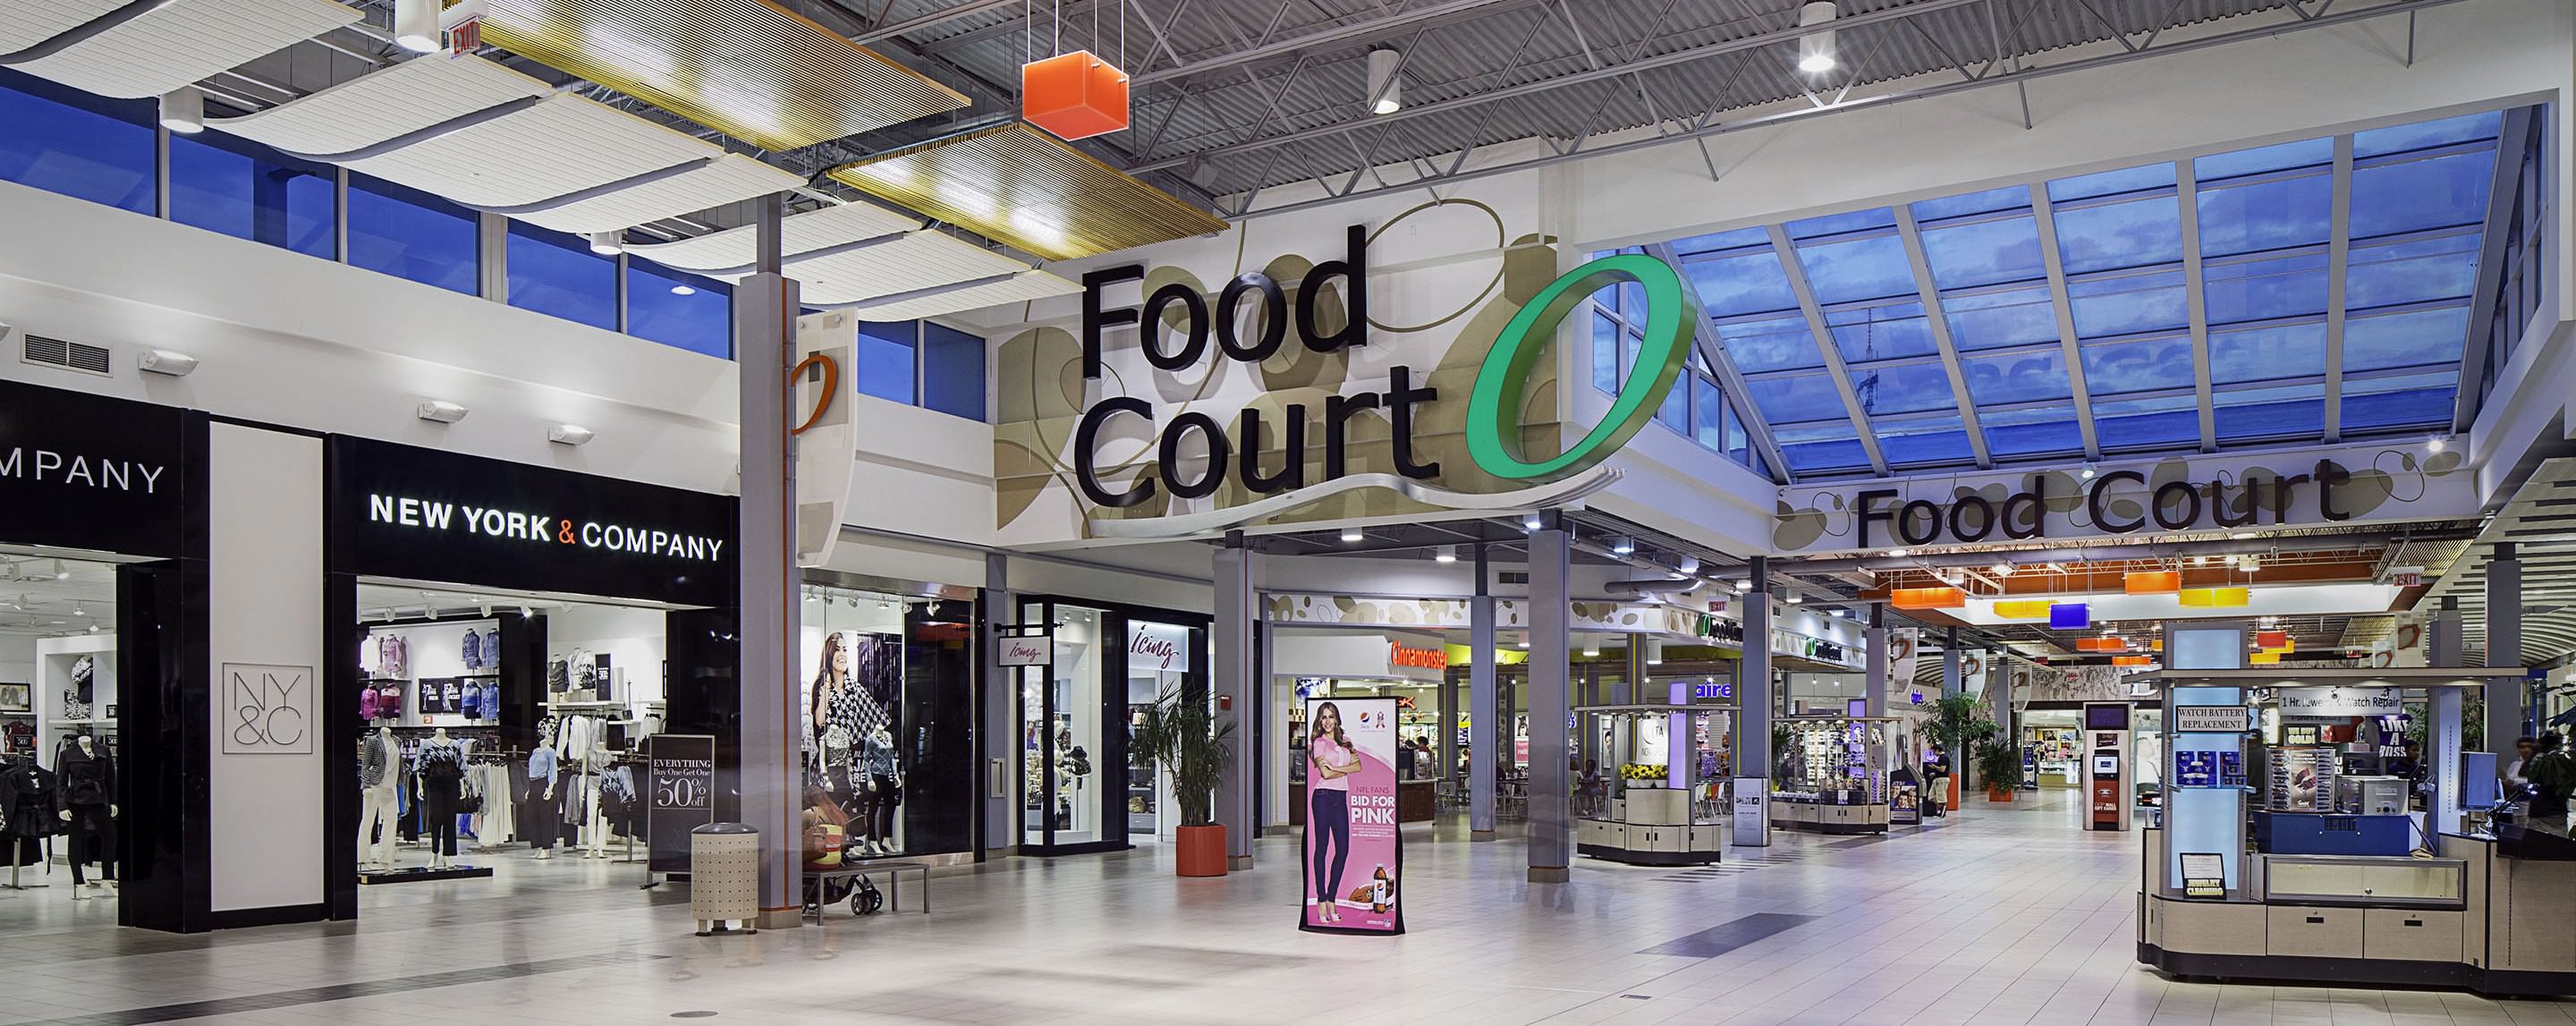 A food court in a mall is filled with kiosks and is located near the New York & Company and PINK